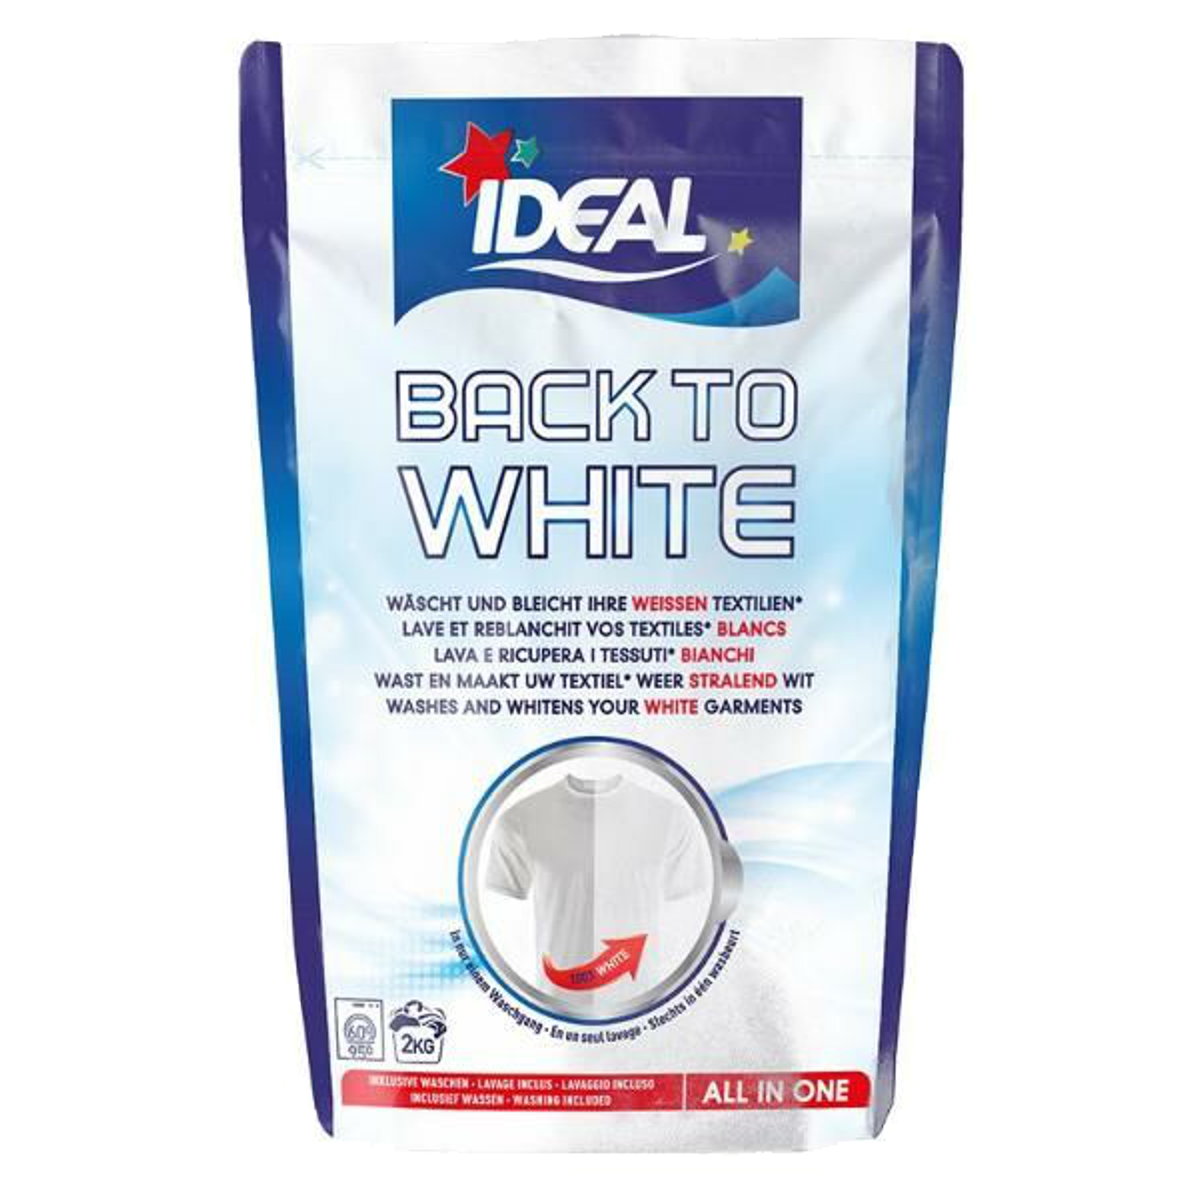 IDEAL Back2White weiss 400g